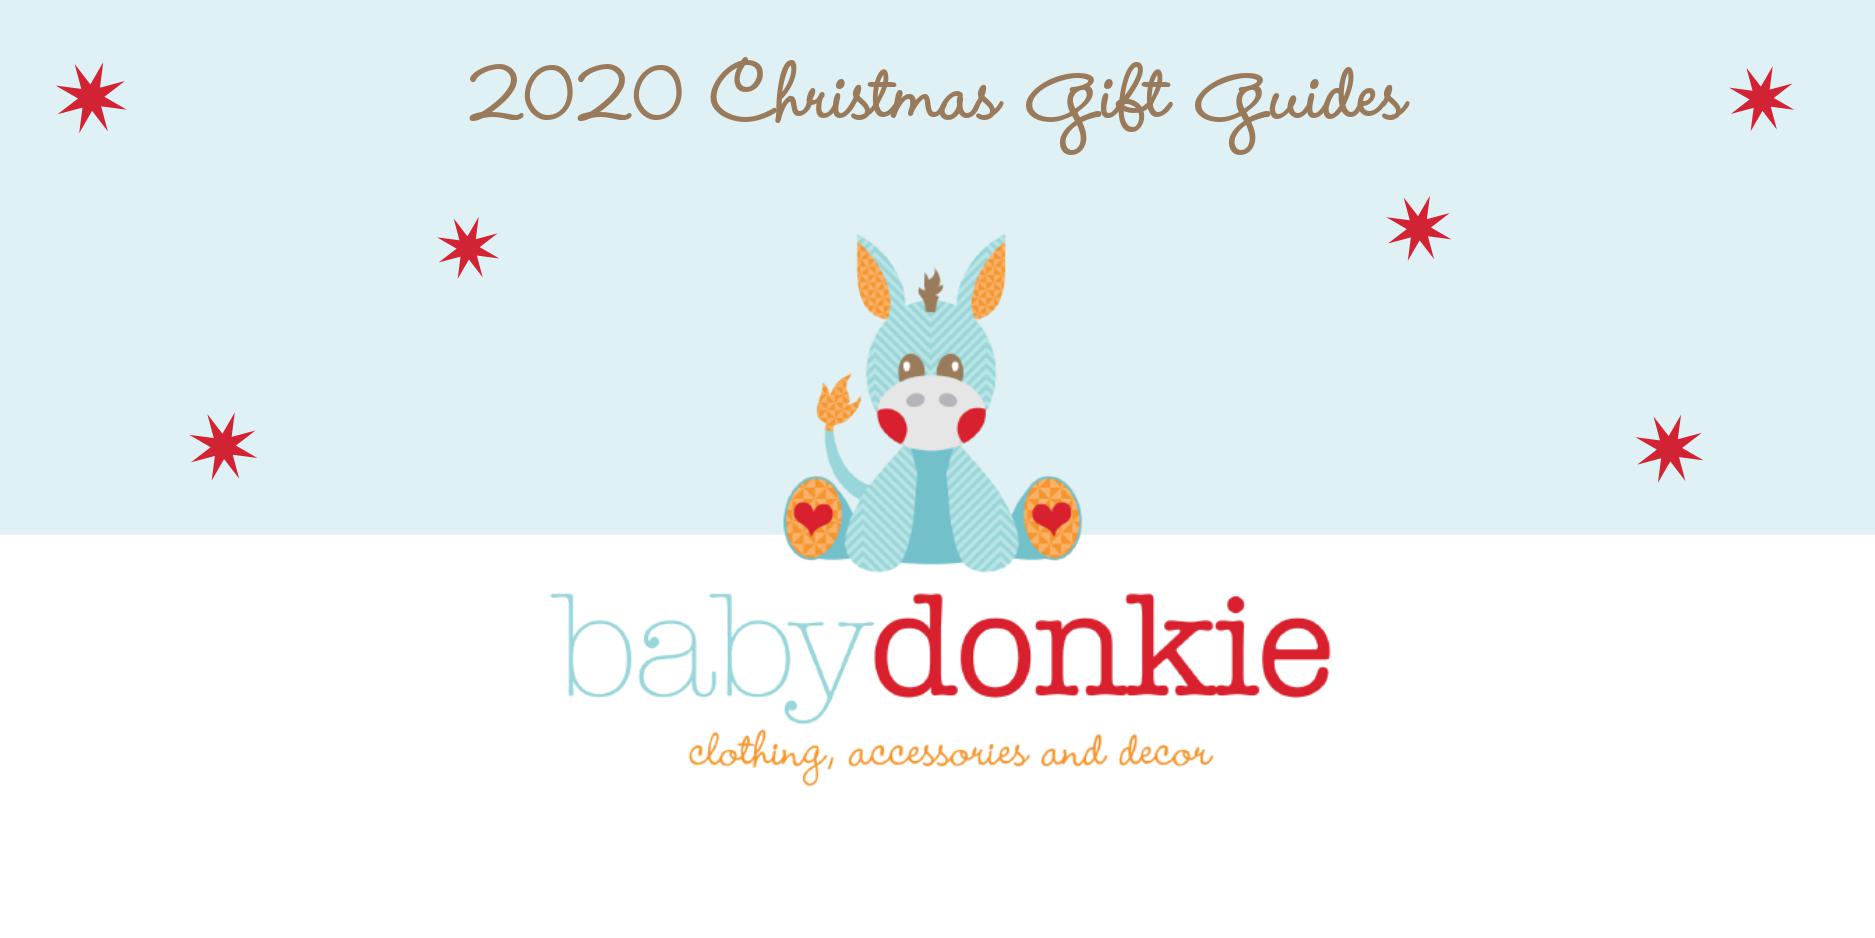 The Best Christmas Gift Ideas for Kids 2020